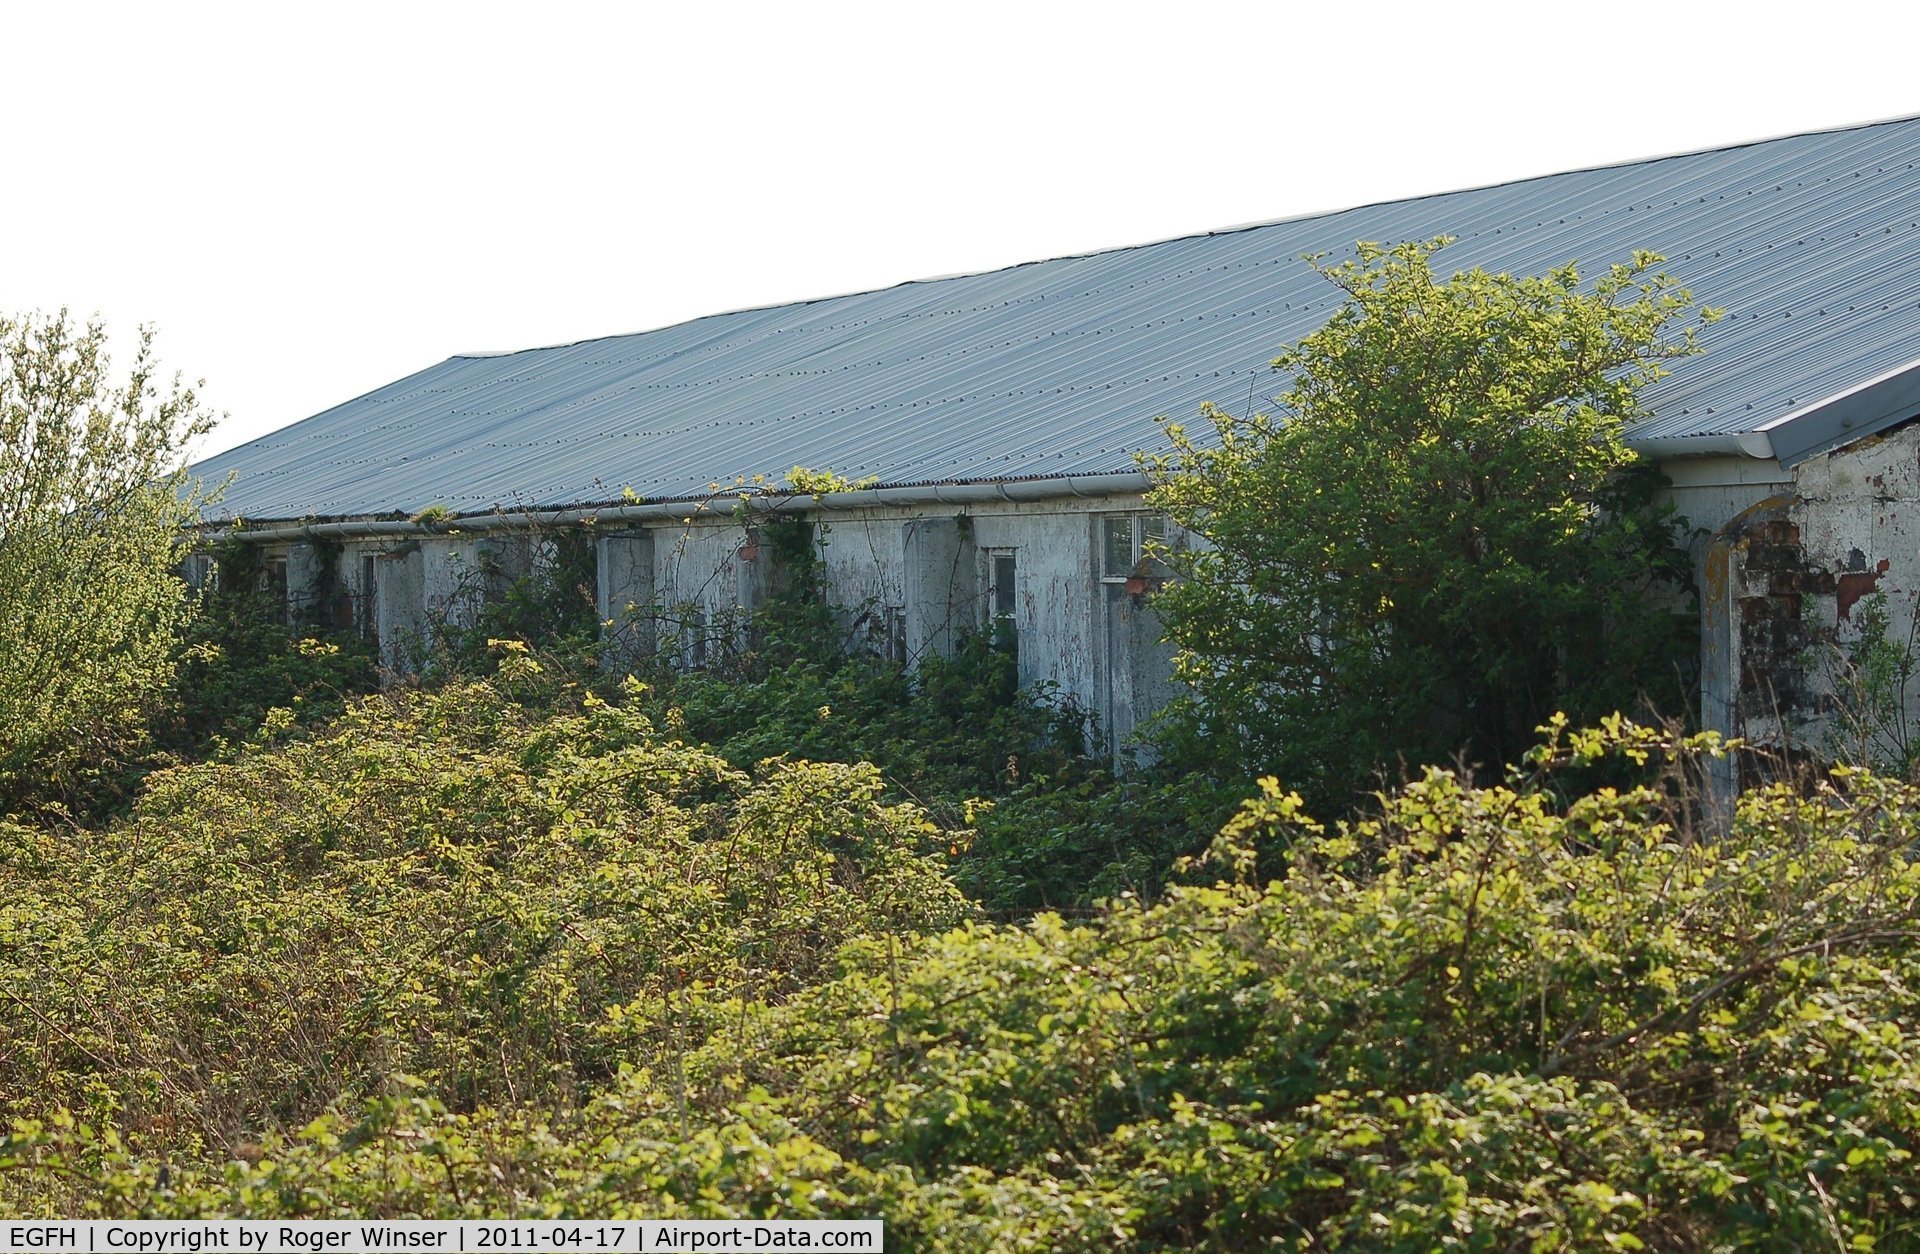 Swansea Airport, Swansea, Wales United Kingdom (EGFH) - Former RAF Squadron Offices built in 1941. 